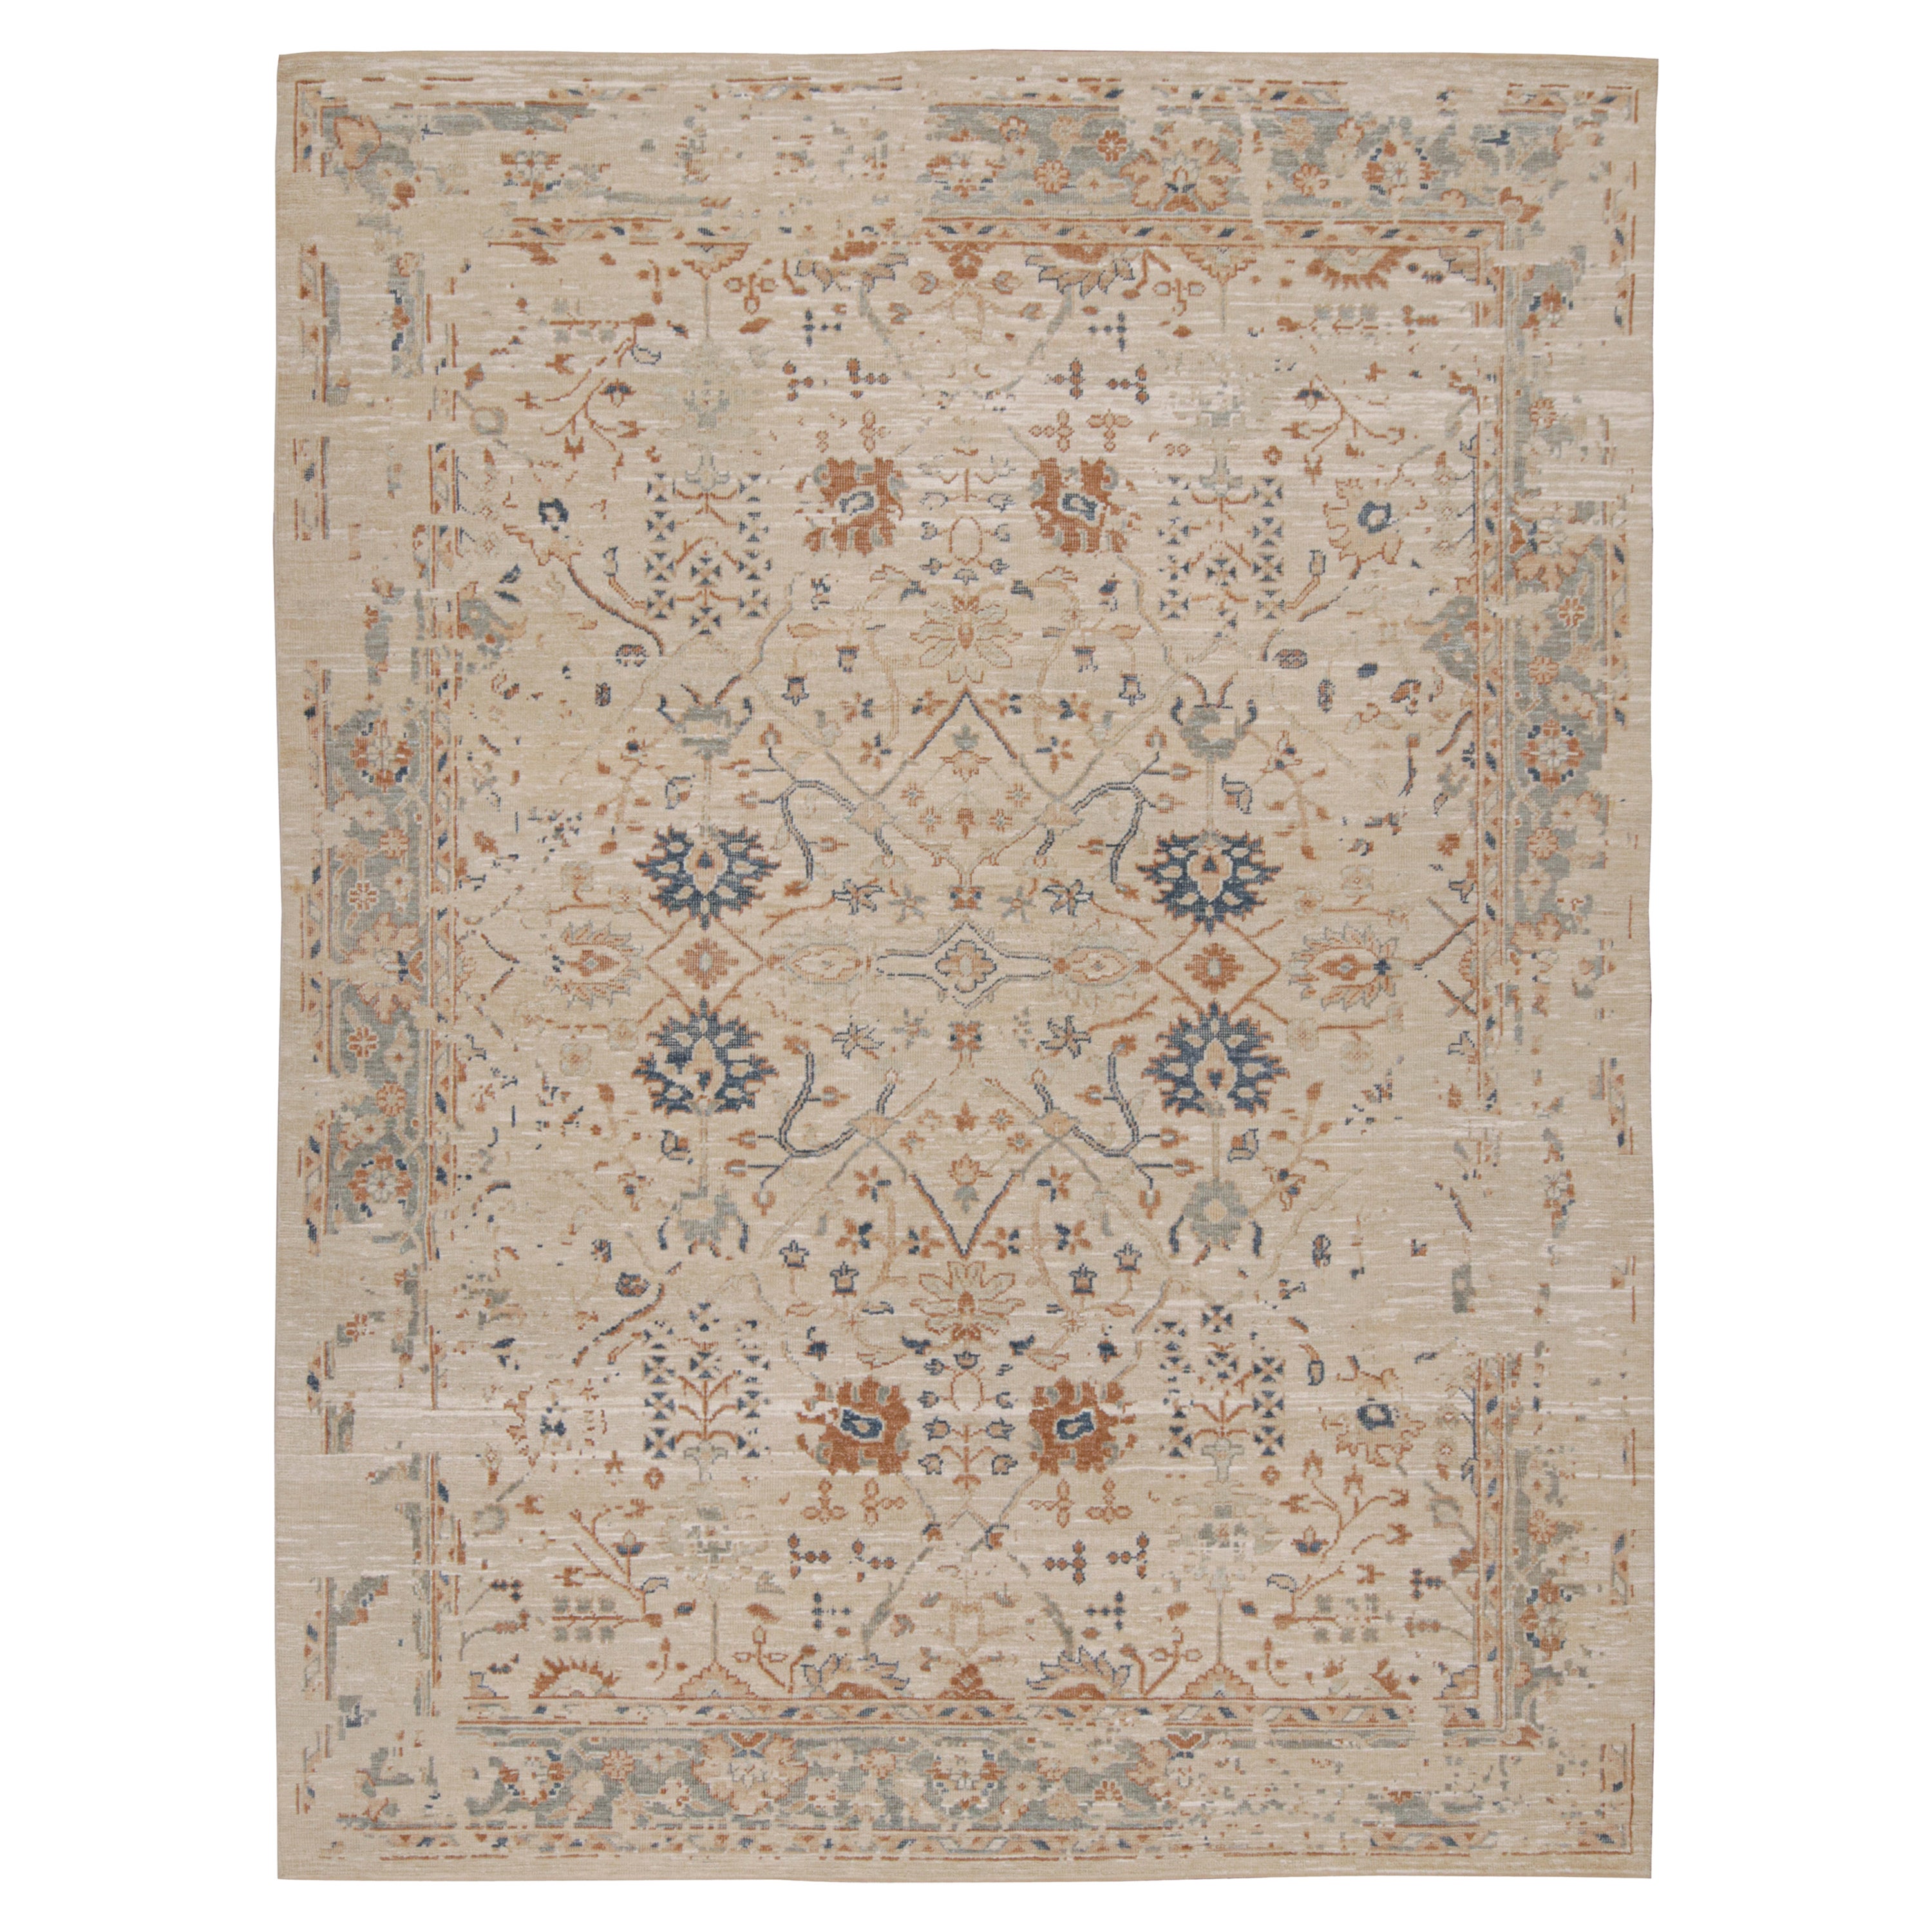 Rug & Kilim’s Oushak Style Rug with Beige, Rust and Navy Blue Floral Patterns